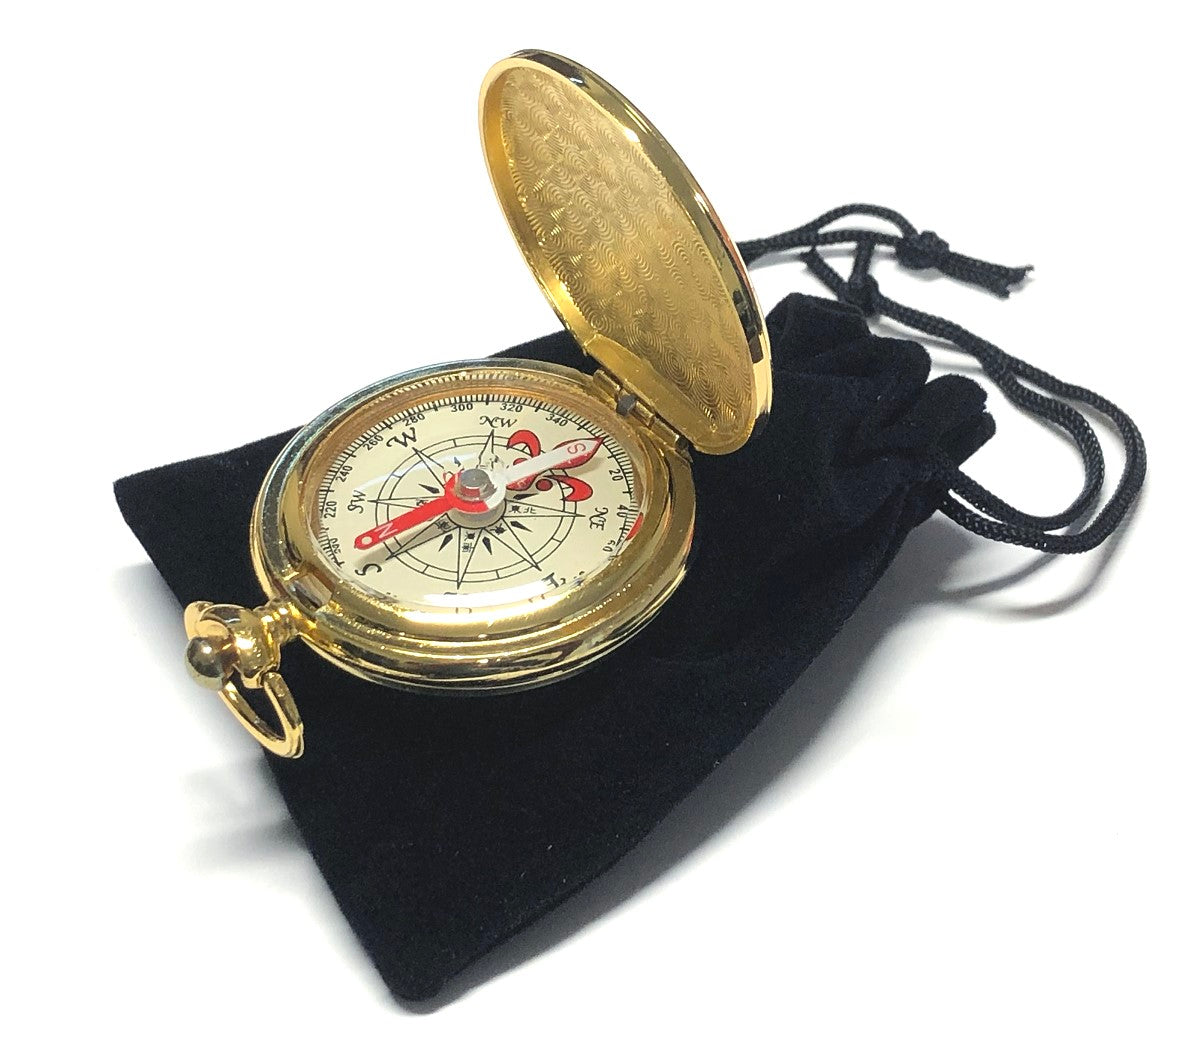 Treknor Pocket Compass - Gold, with pouch